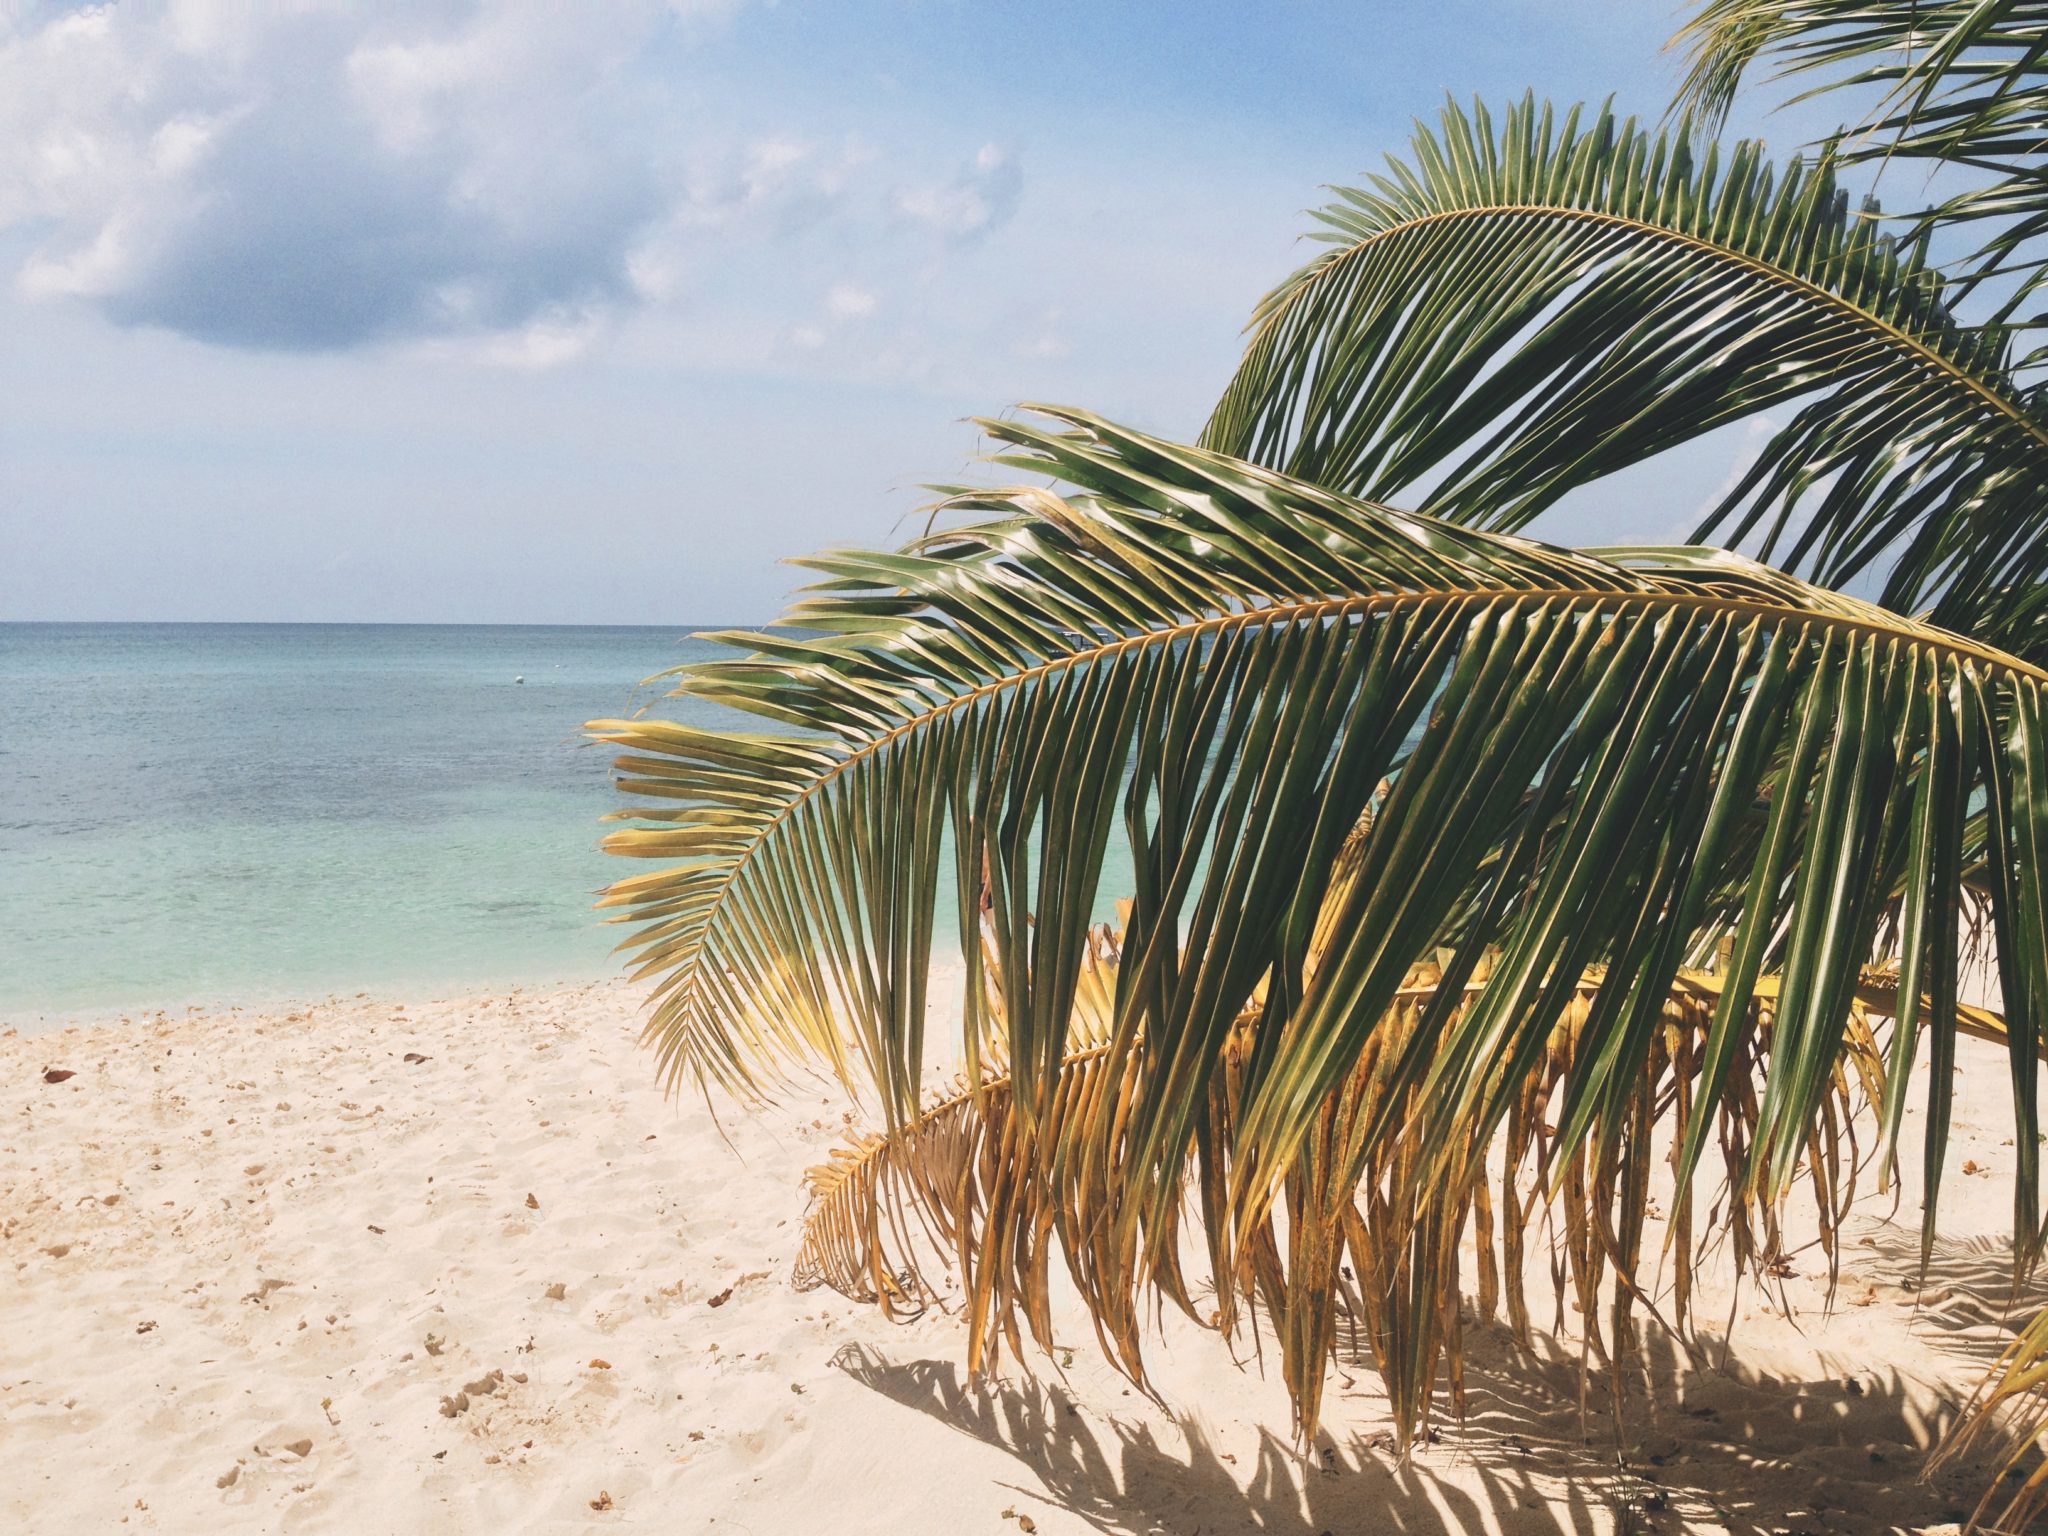 Sandy Beach with palm frond by John Price from stocksnap.io